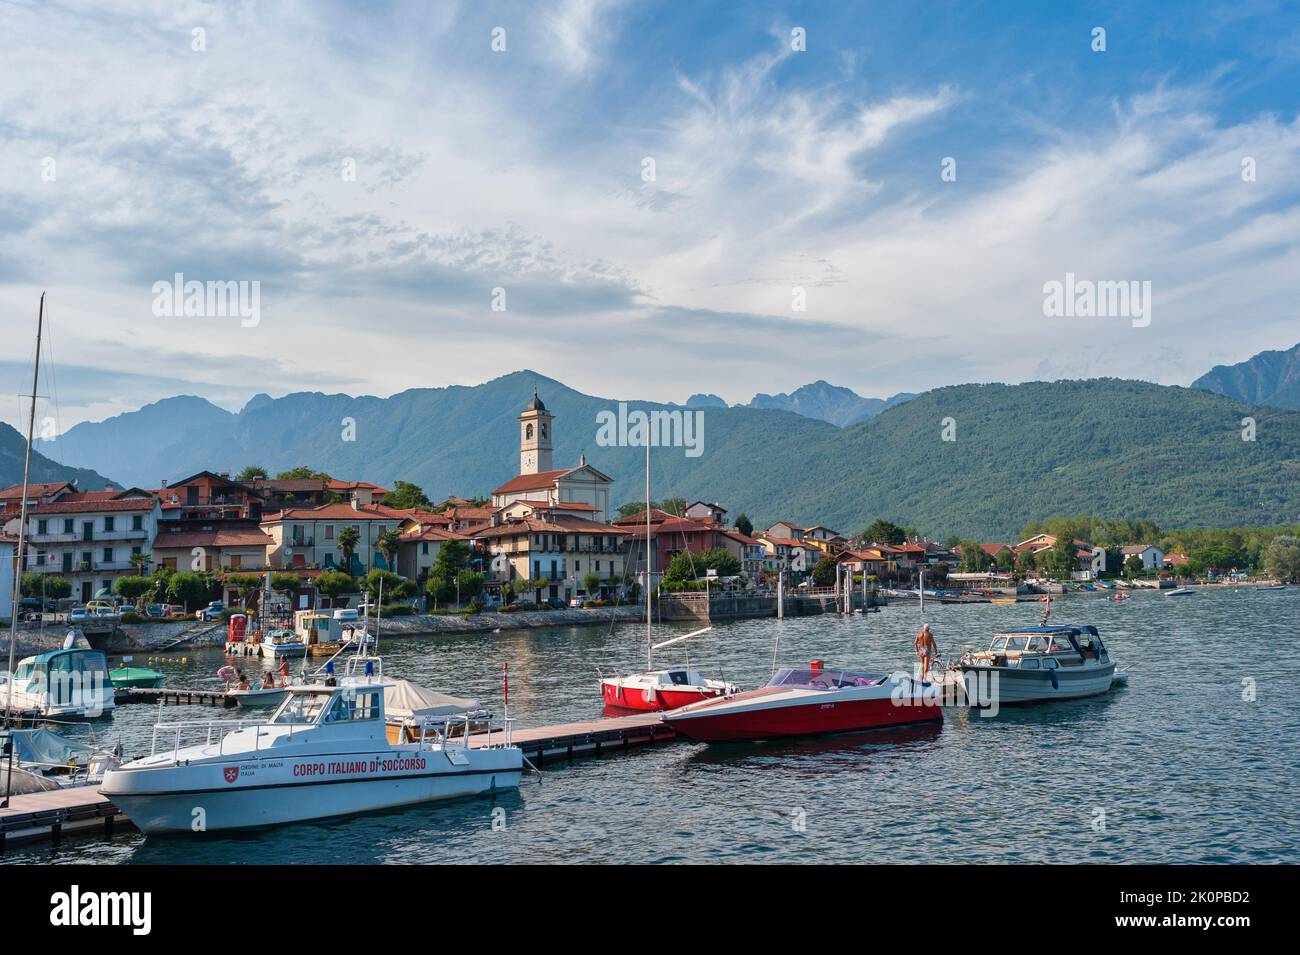 Townscape with harbor, Feriolo, Piedmont, Italy, Europe Stock Photo